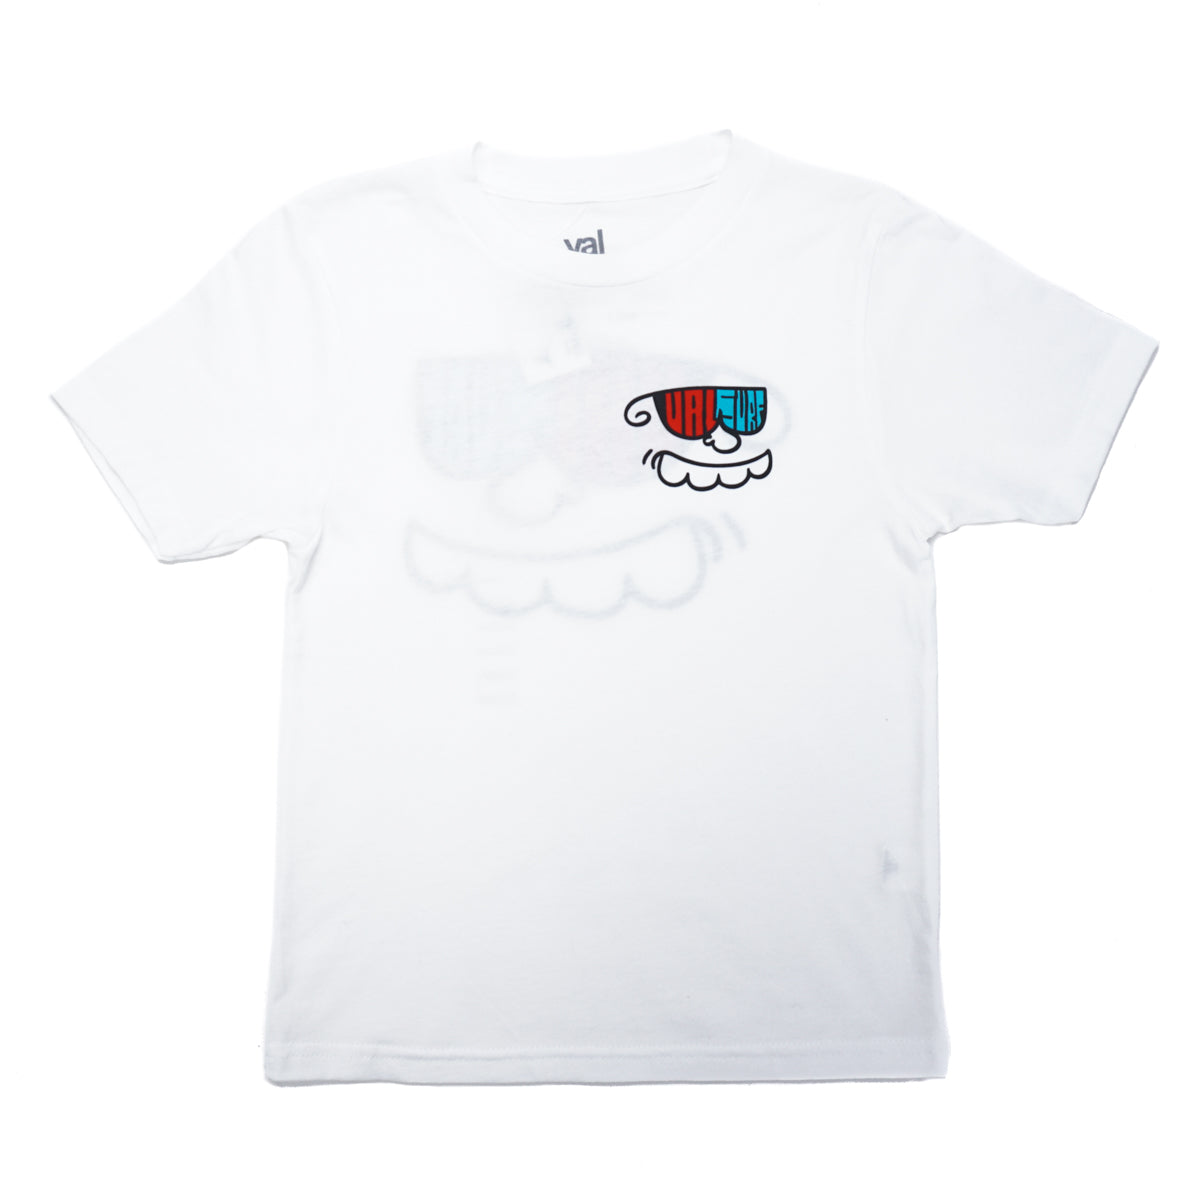 Happy Glaboe Tee Youth - White